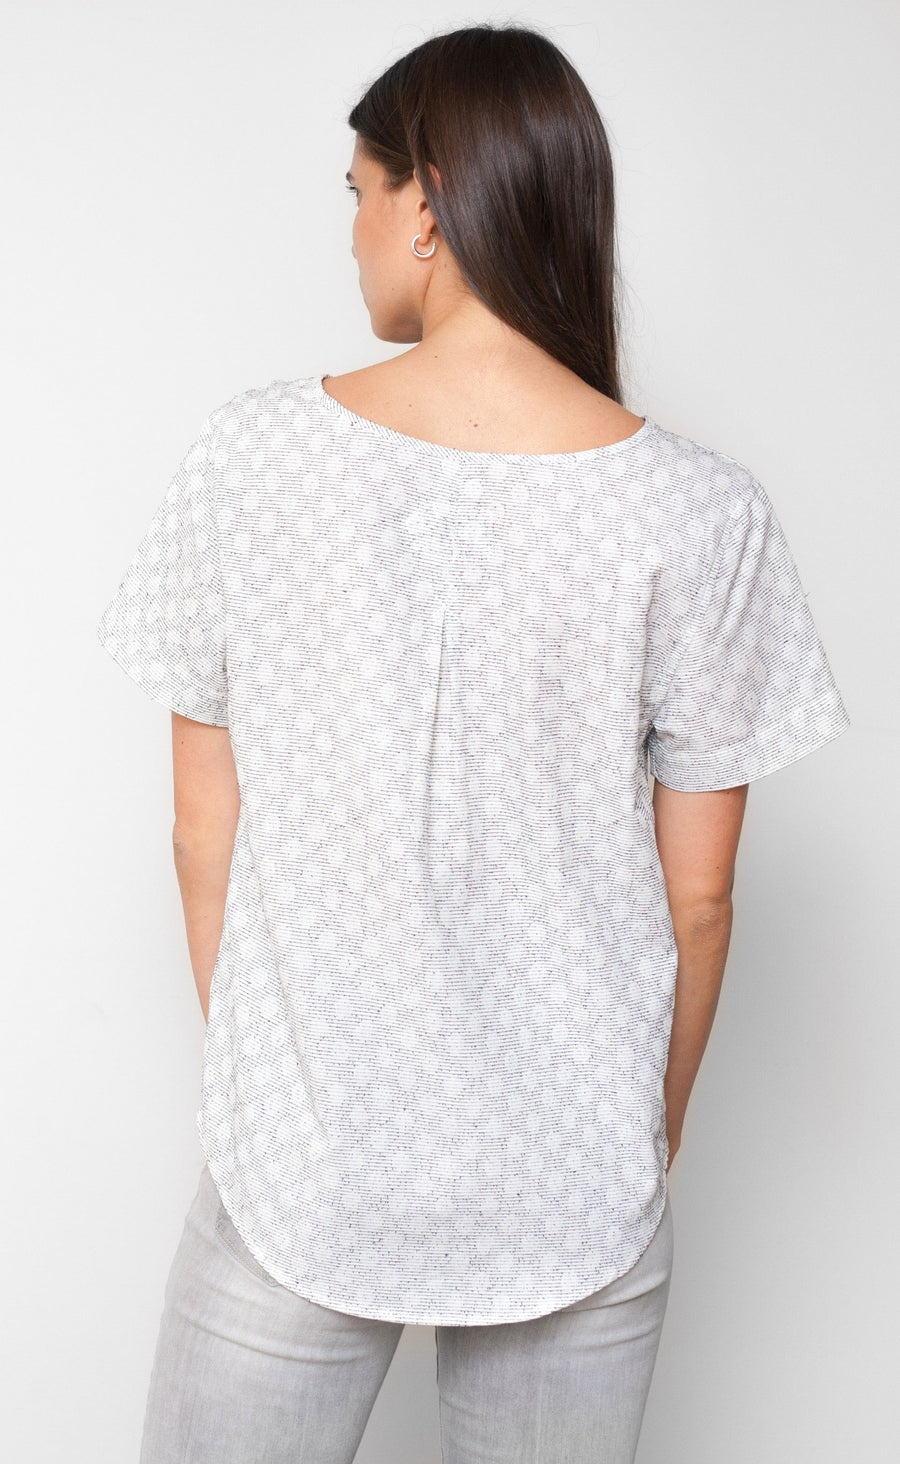 The Muse - Woven Tee